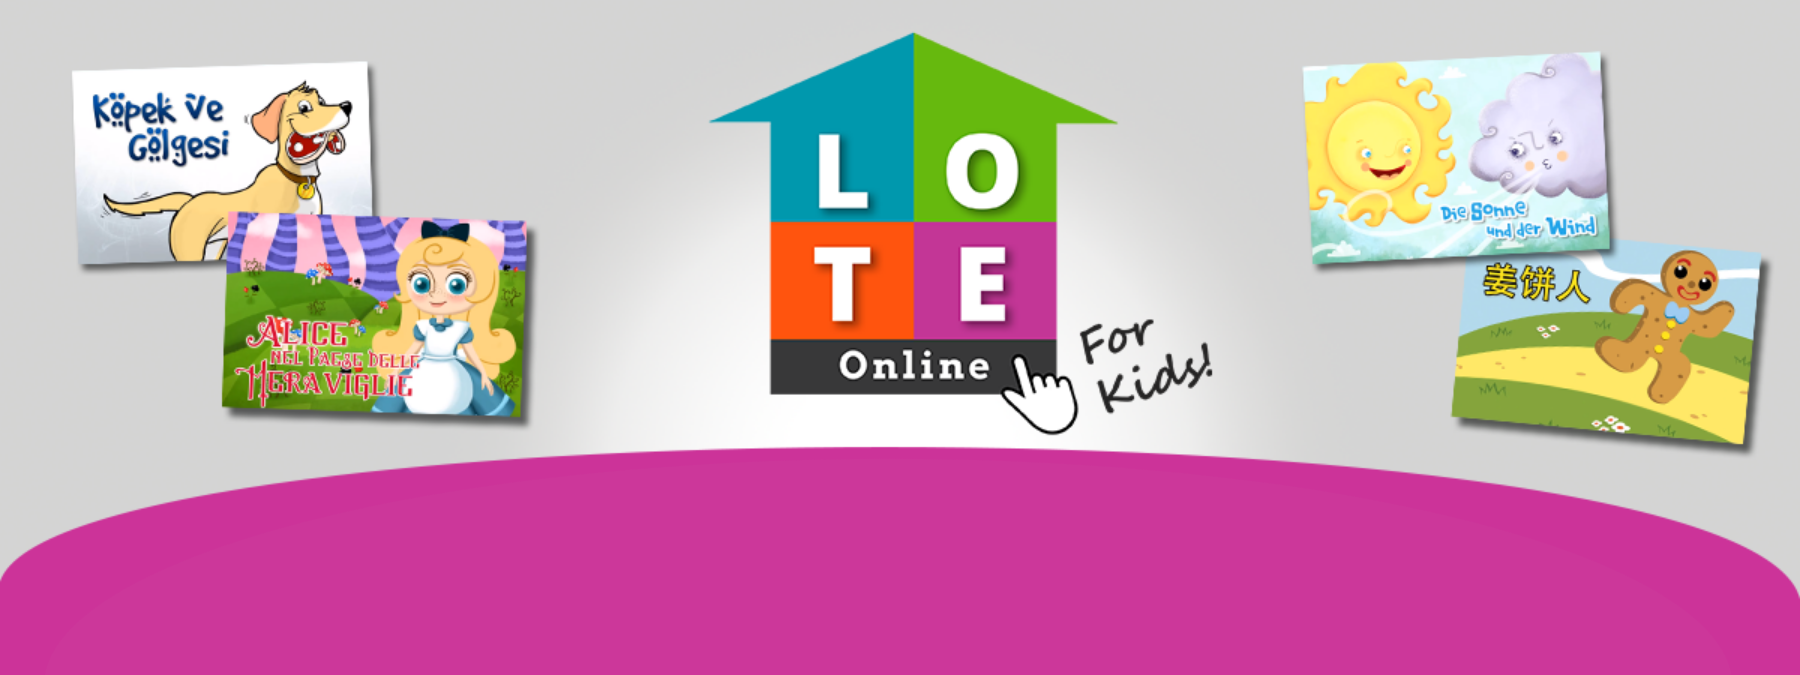 Gray and purple background with 4 images of children's books with the LOTE Online for Kids logo in the centre.